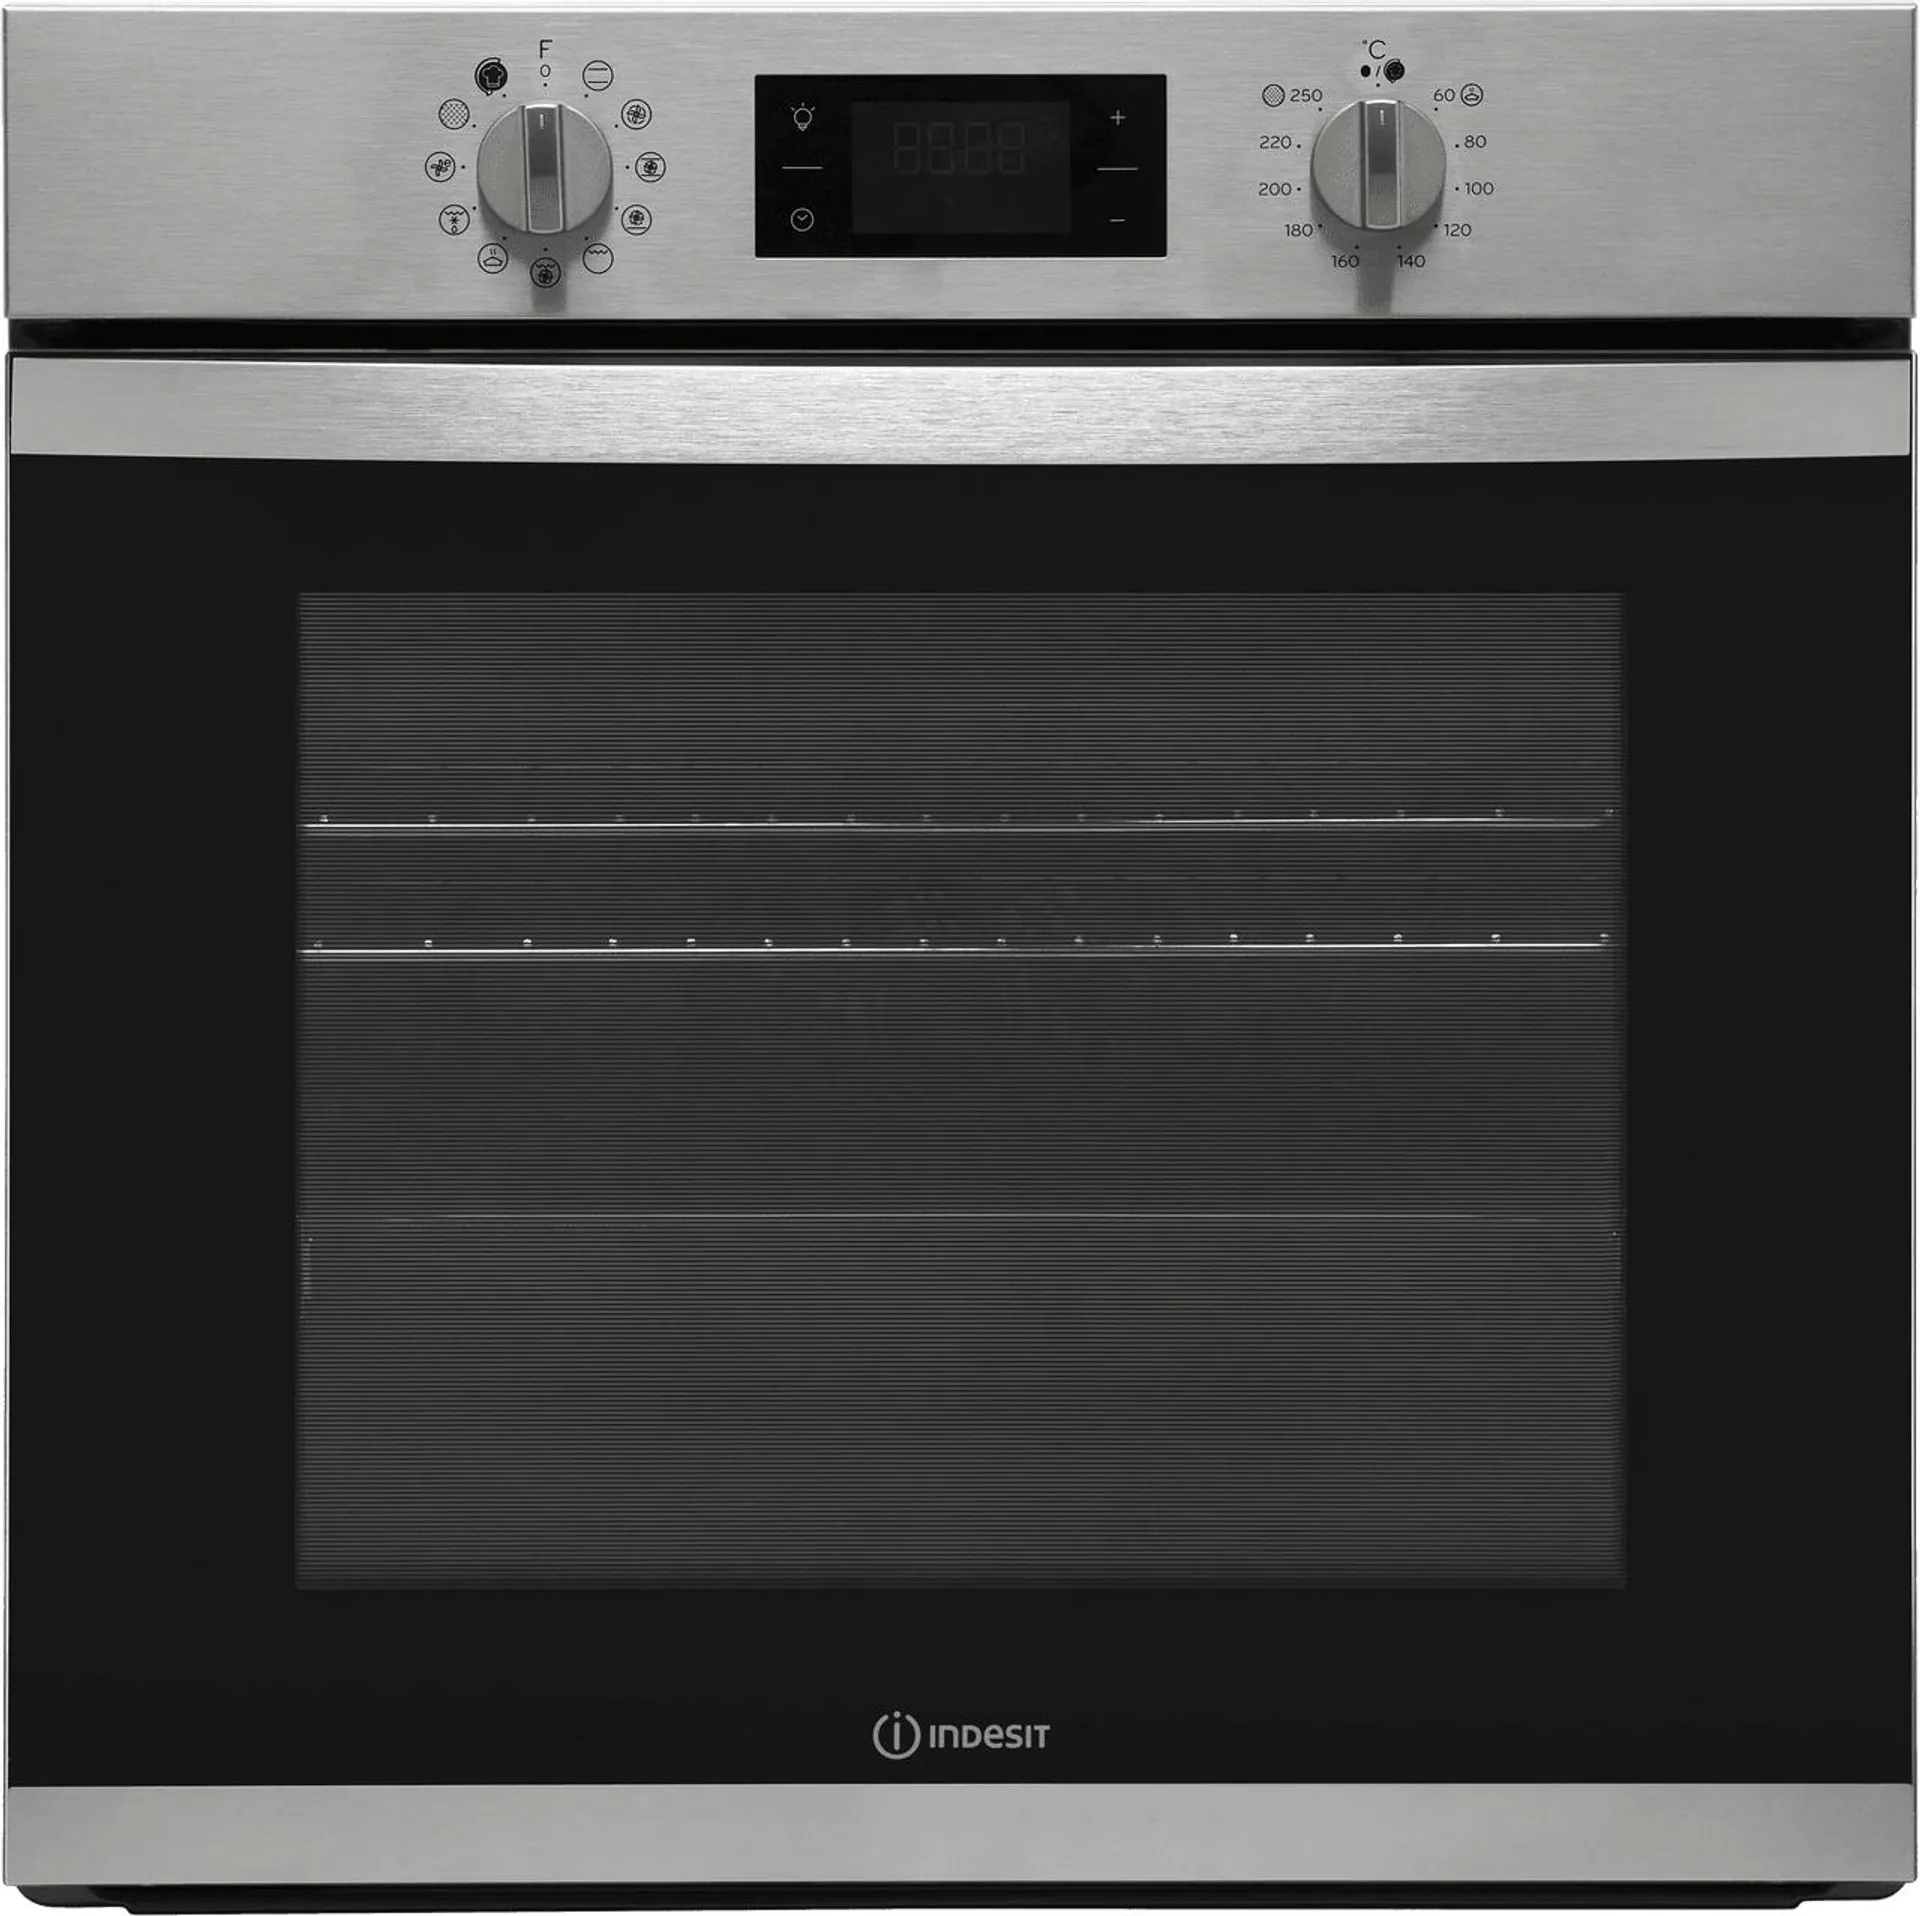 Indesit IFW3841PIXUK Built In Electric Single Oven - Stainless Steel - A+ Rated